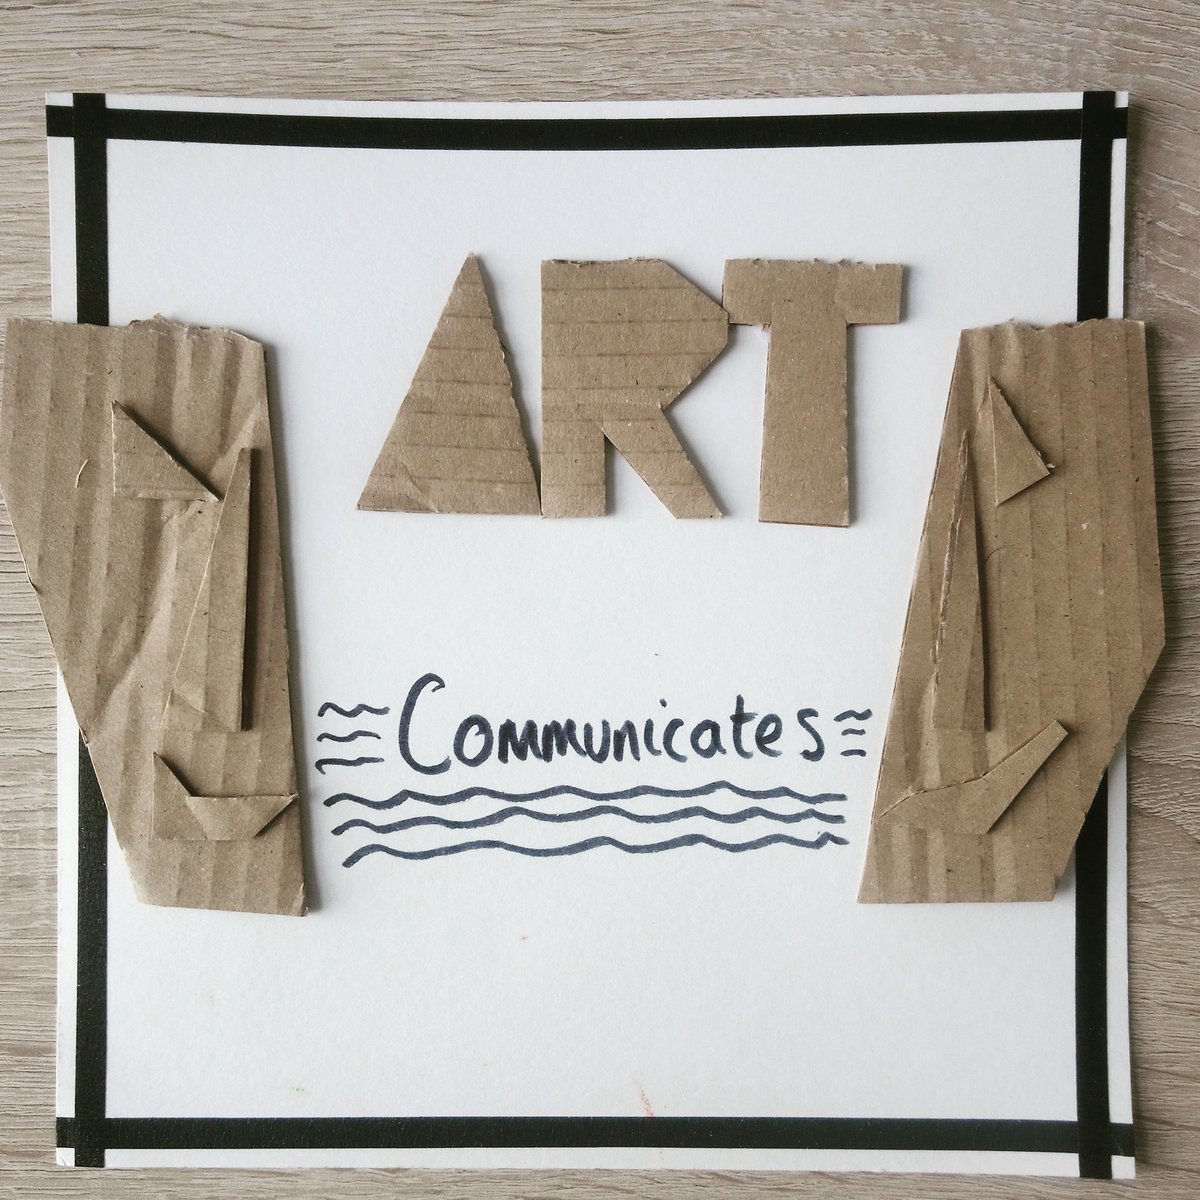 Day 4 - Art communicates

I think #Malaguzzi #100languages of children can be applied to us all

#arteducationmatters
#artisahumanright #collage
#papercollage #internationalartseducationweek #ArtsEdWeek #ArtsUniteUs @InSEA_Blog  @NSEAD1 @WAAE_ArtsEd